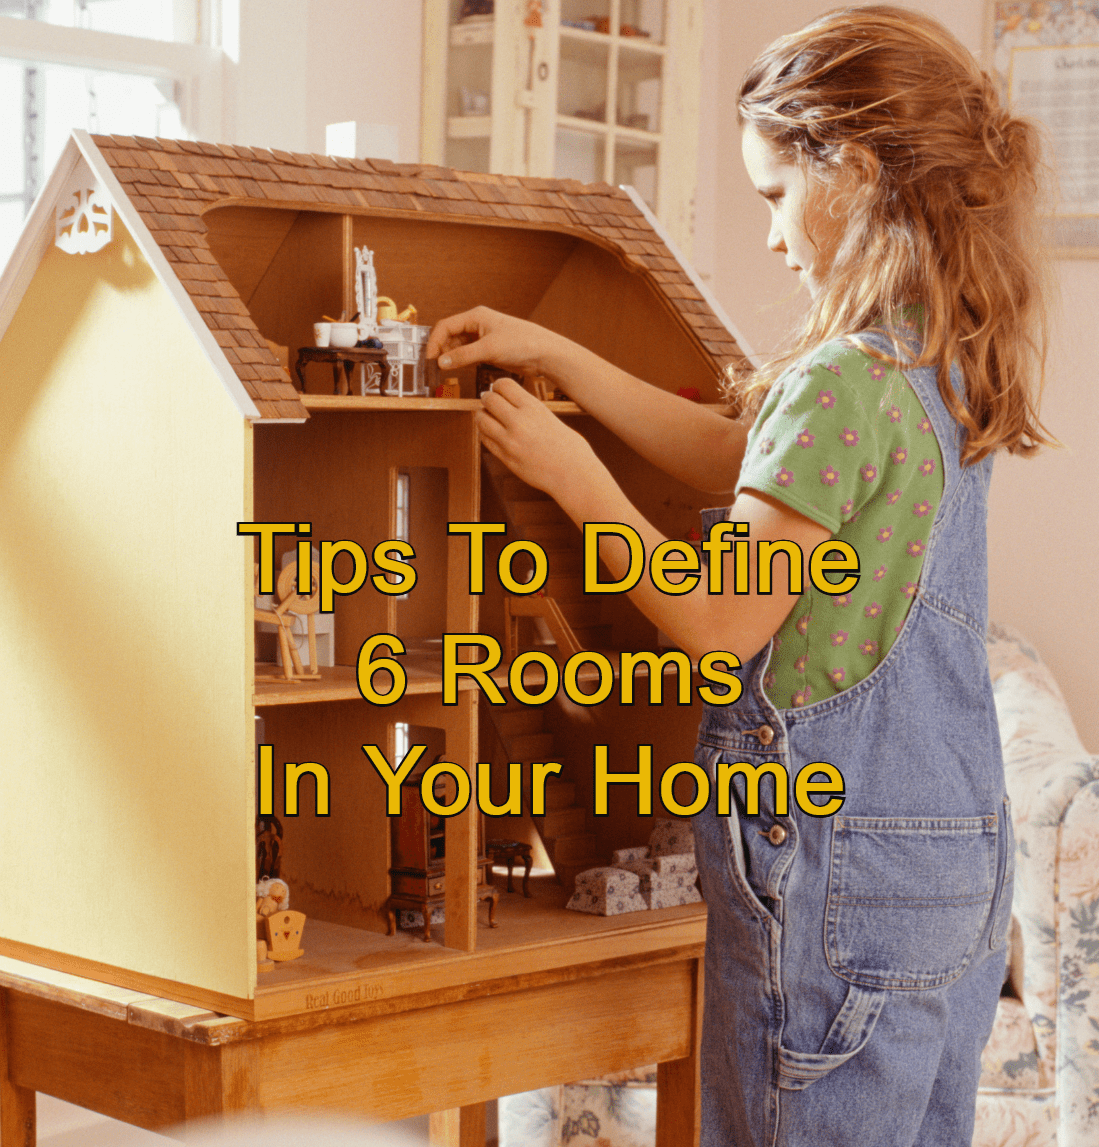 Little girl playing with a dollhouse and text that says Tips to Define 6 Rooms In Your Home